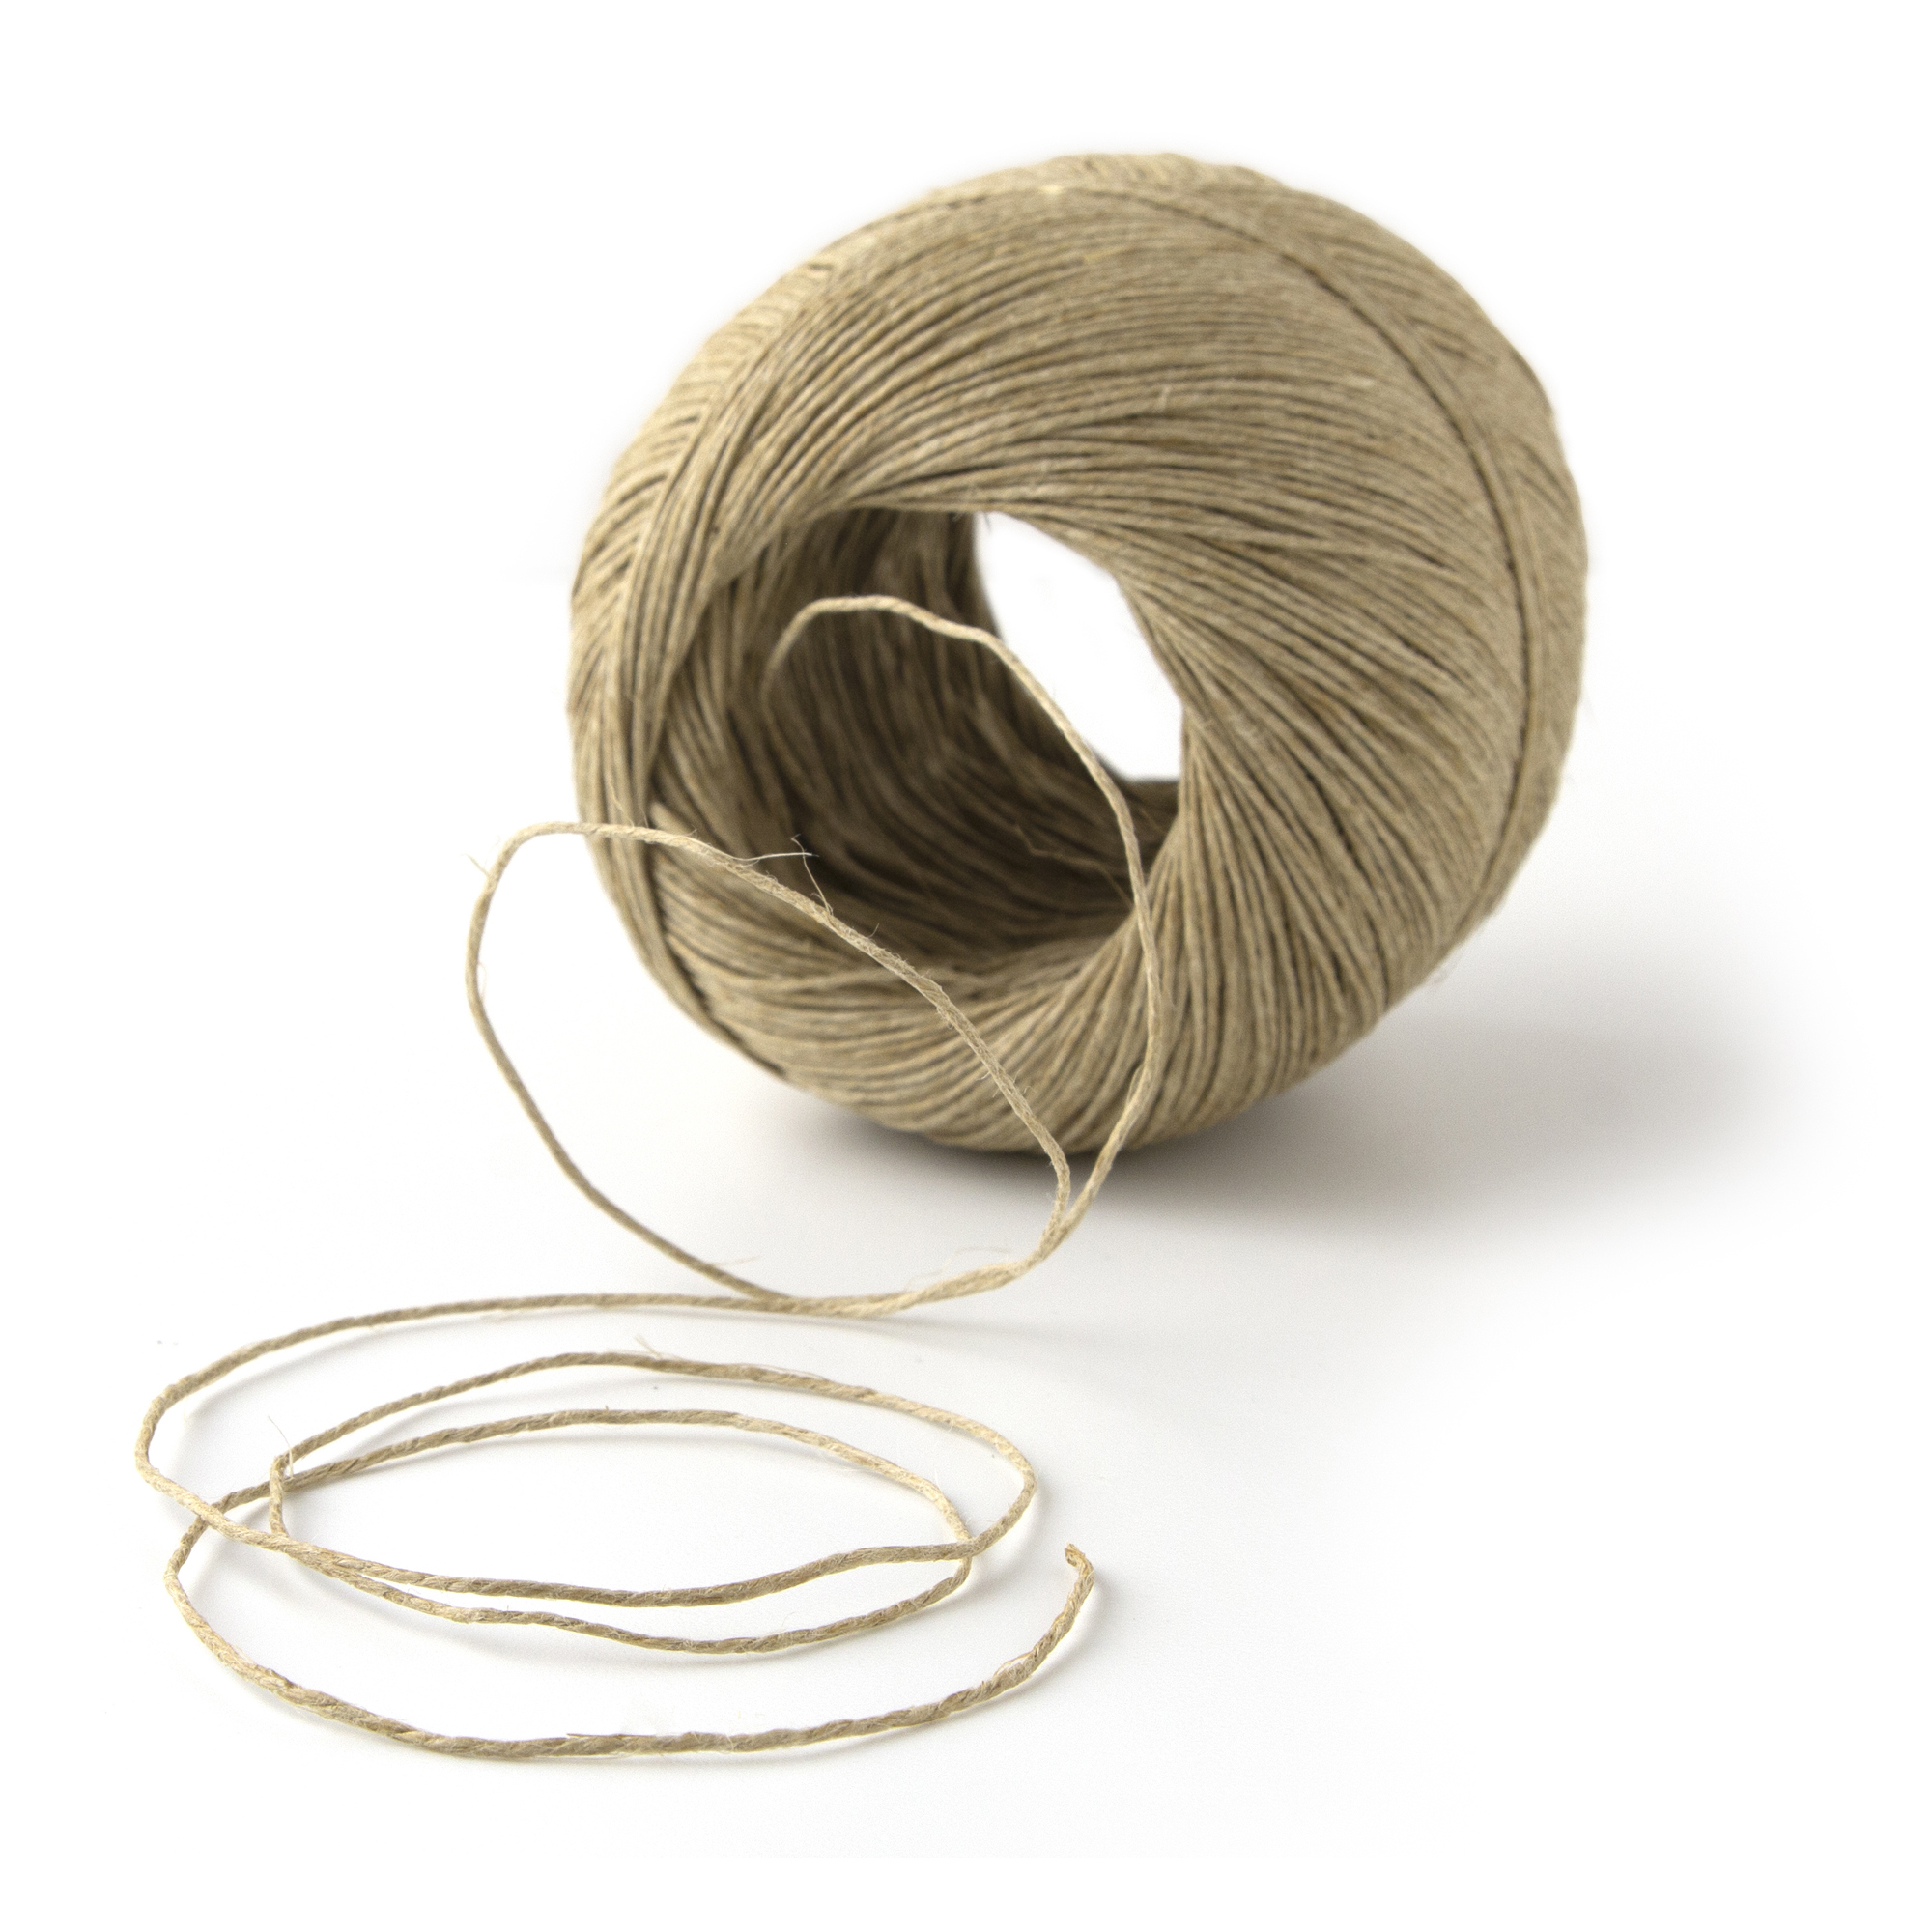 Cousin DIY 10 lb Thin Polished Hemp Cord Twine, 400 ft, Natural Brown - image 4 of 8